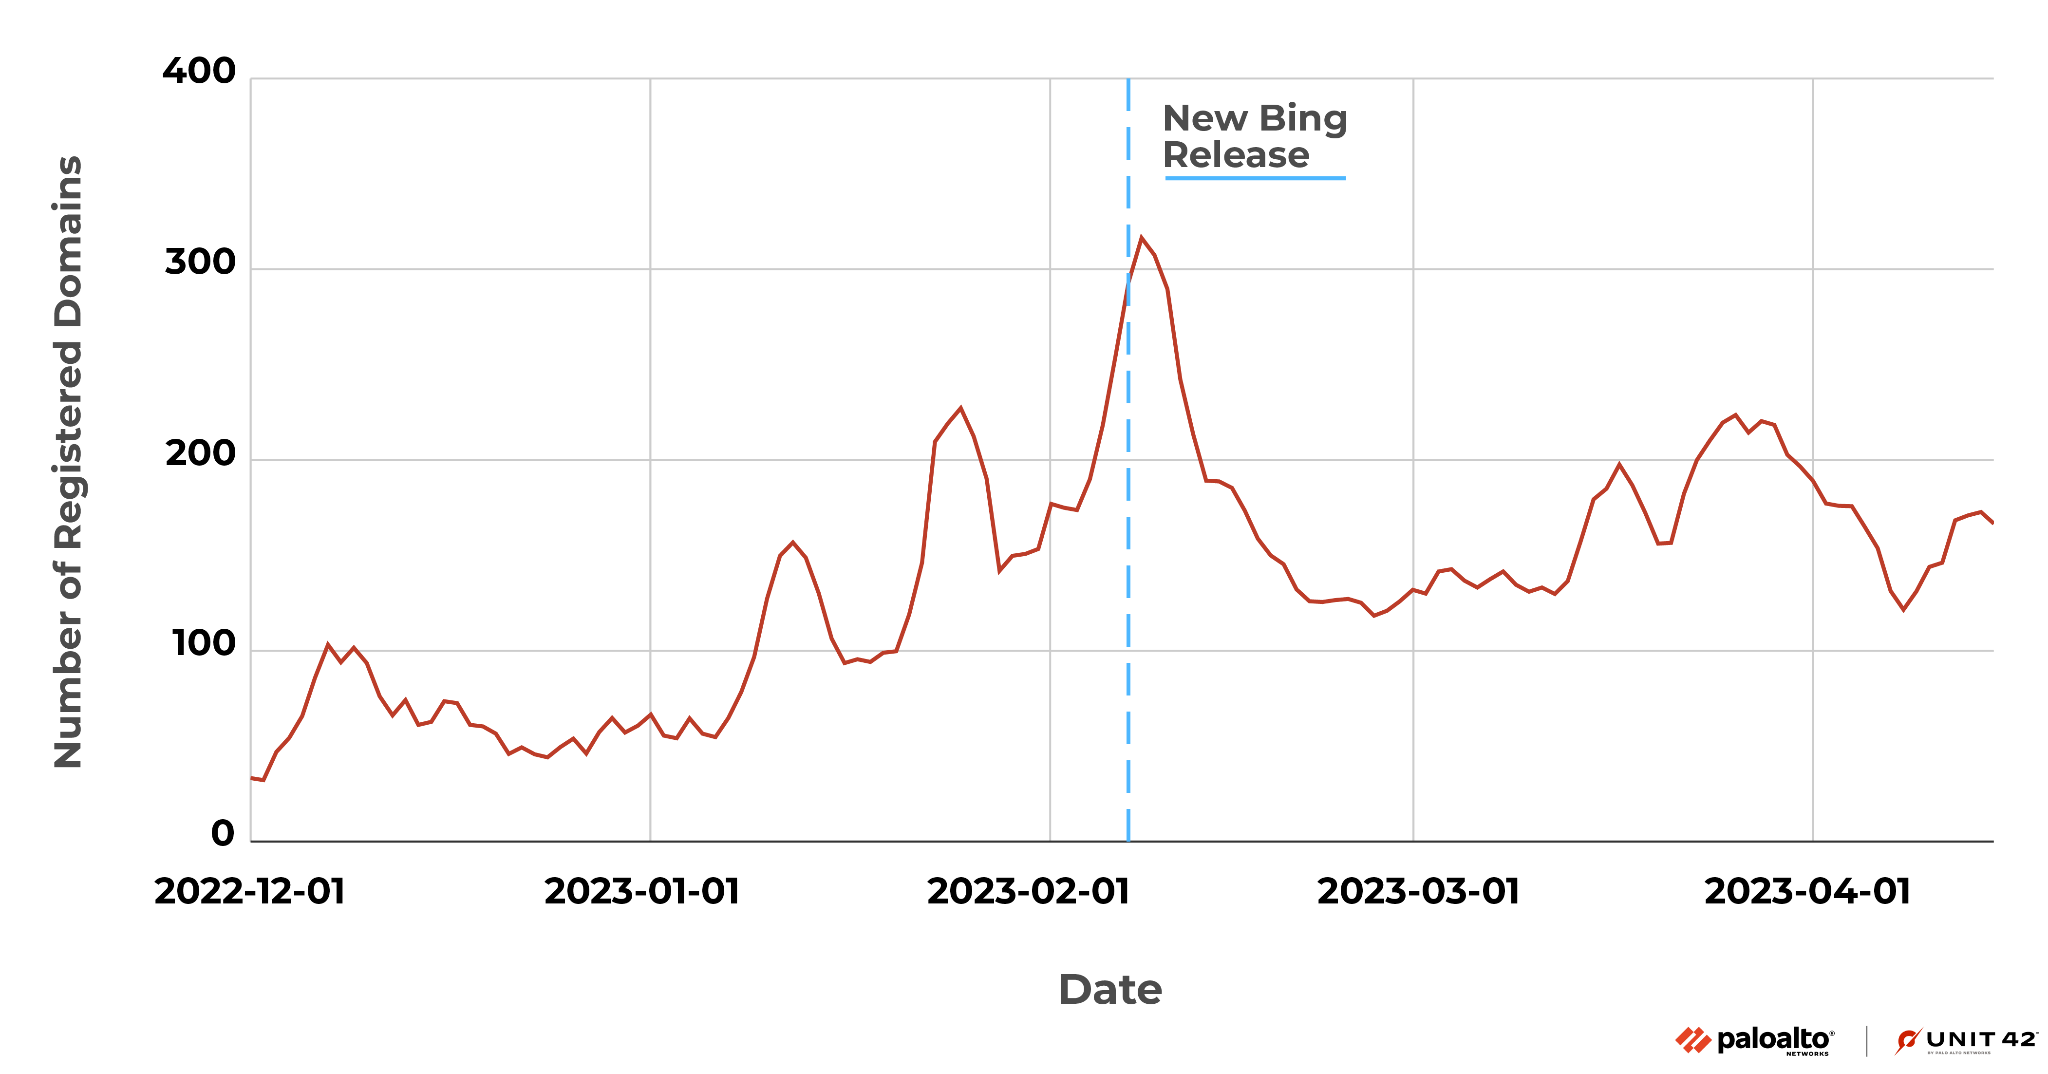 Image 1 is a chart showing the amount of ChatGPT domain squatting over time. It starts 1 December 2022, and extends through 1 April 2023. The sharpest increase was over 300 with the new Bing release in February 2023. 